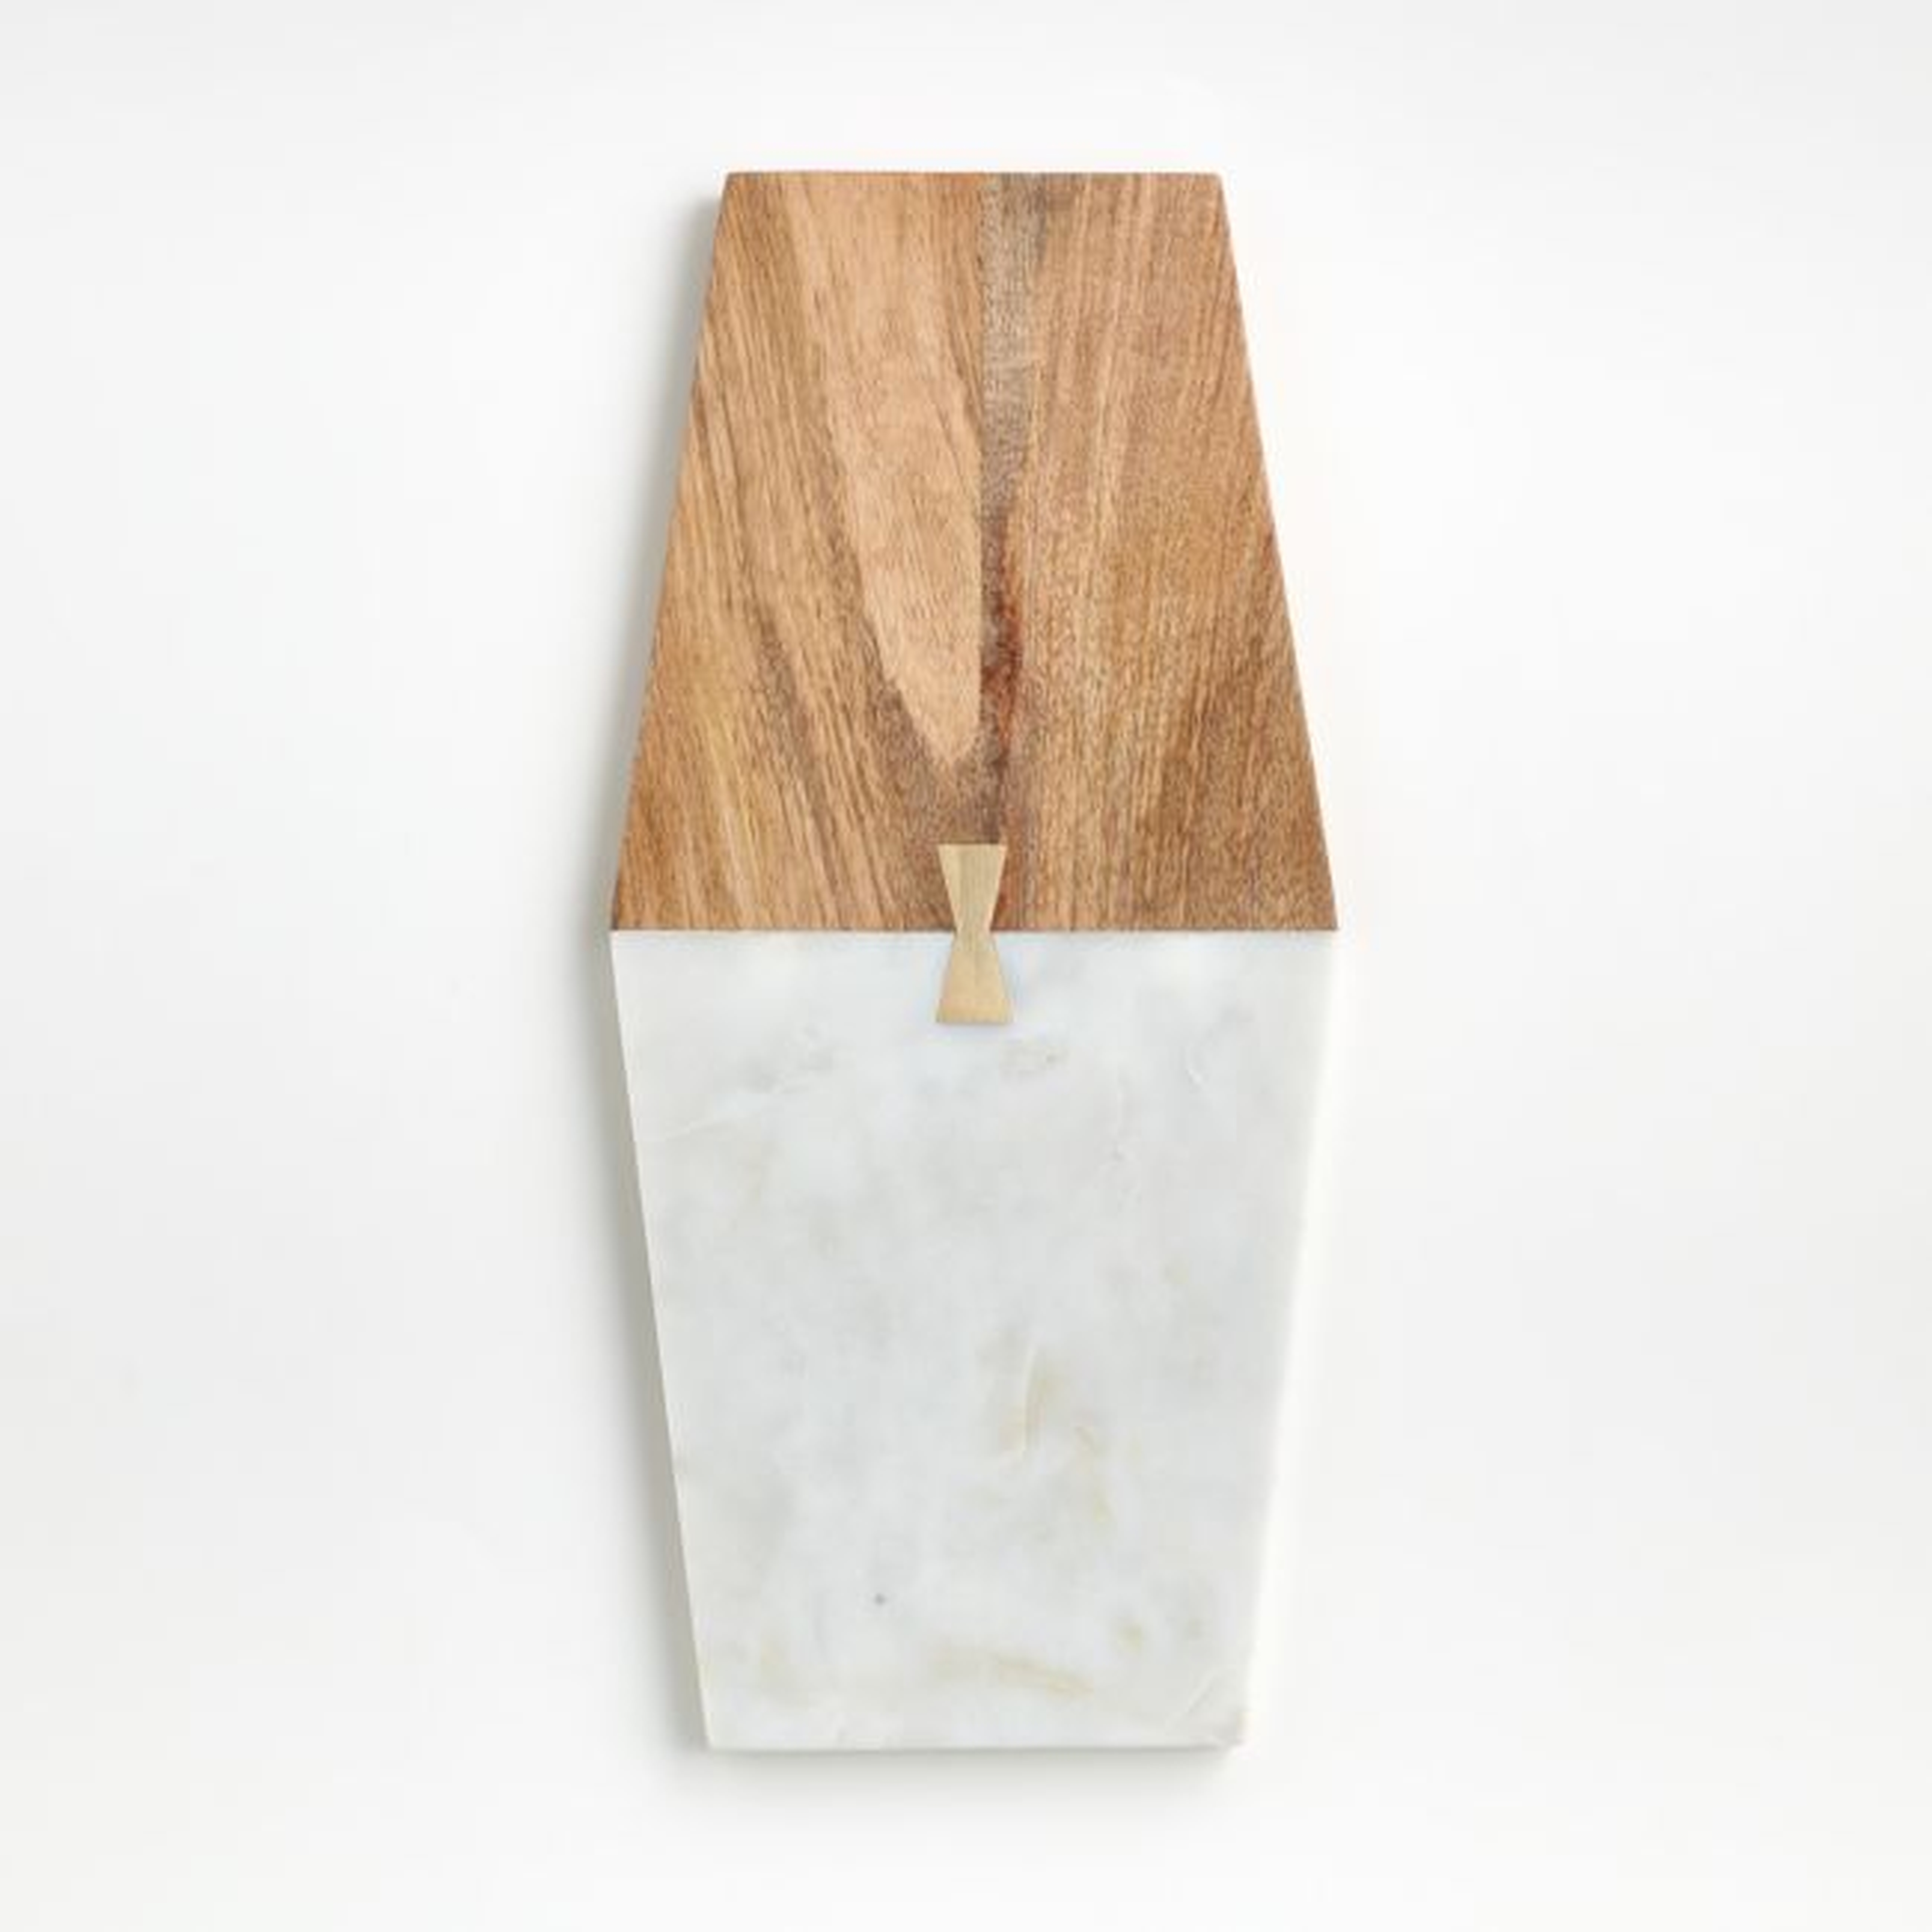 Salvia Wide Nesting Marble and Wood Cheese Board - Crate and Barrel